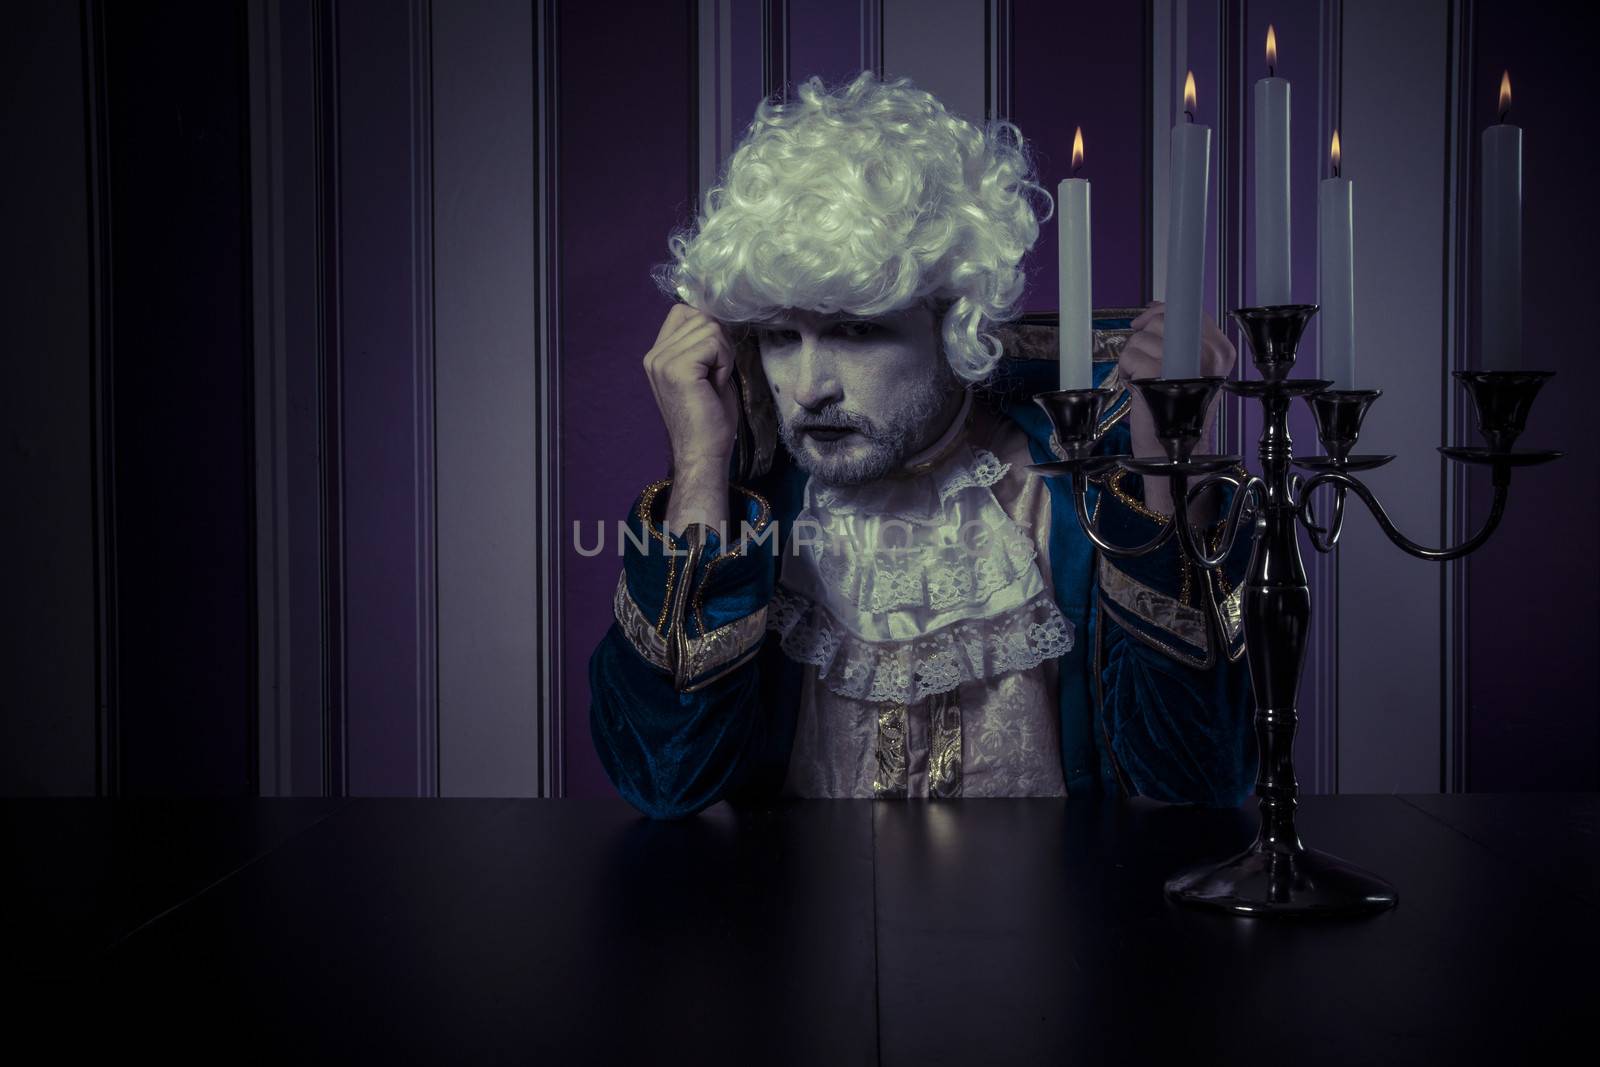 Eighteenth man dressed in rococo style, concept of wealth and po by FernandoCortes